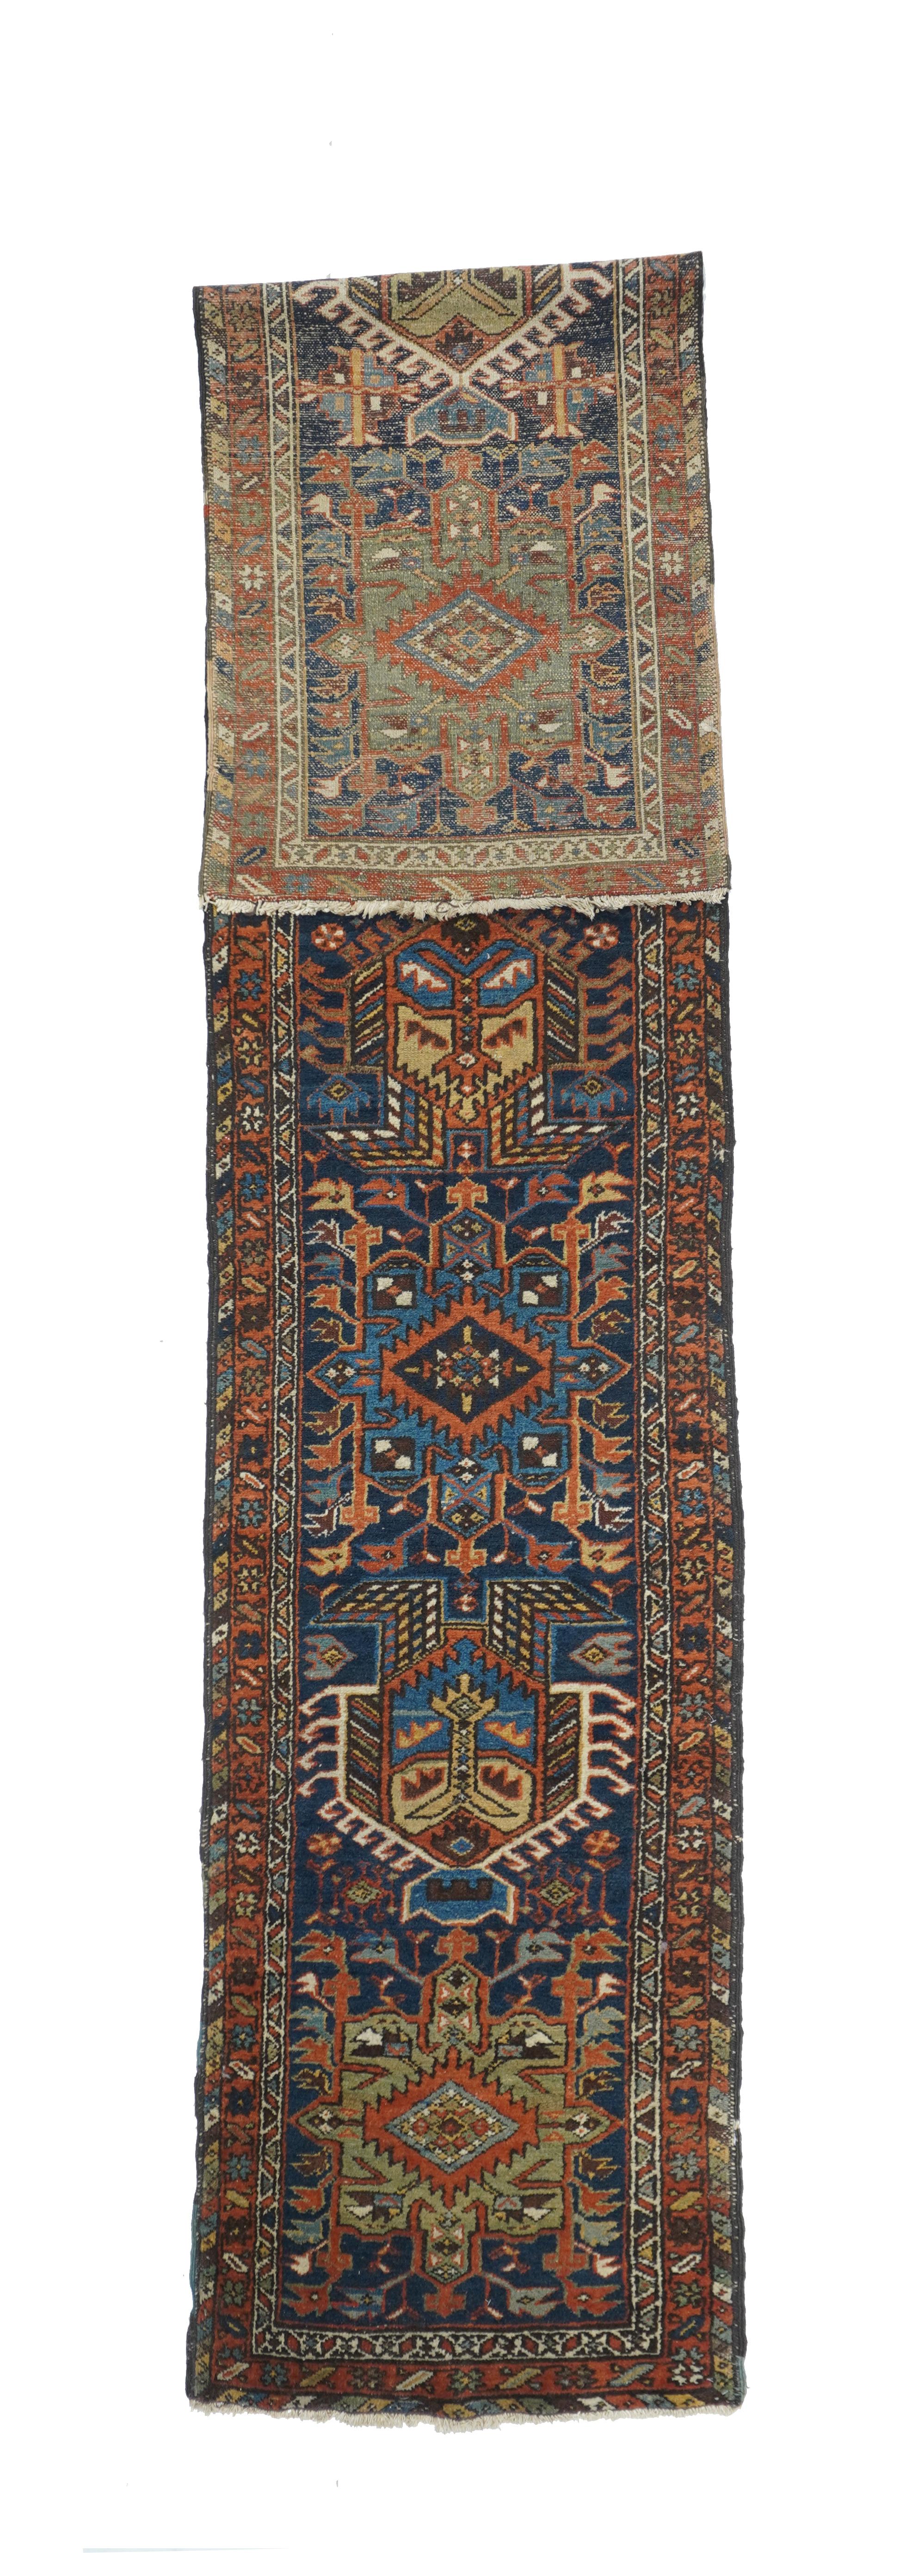 The blue field of this rust ic NW Persian runner displays seven characteristic octogrammes and hooked complex abstract palmette medallions, with ecru, green and medium blue accents. The red border shows stars and oblique bars. Moderate weave on